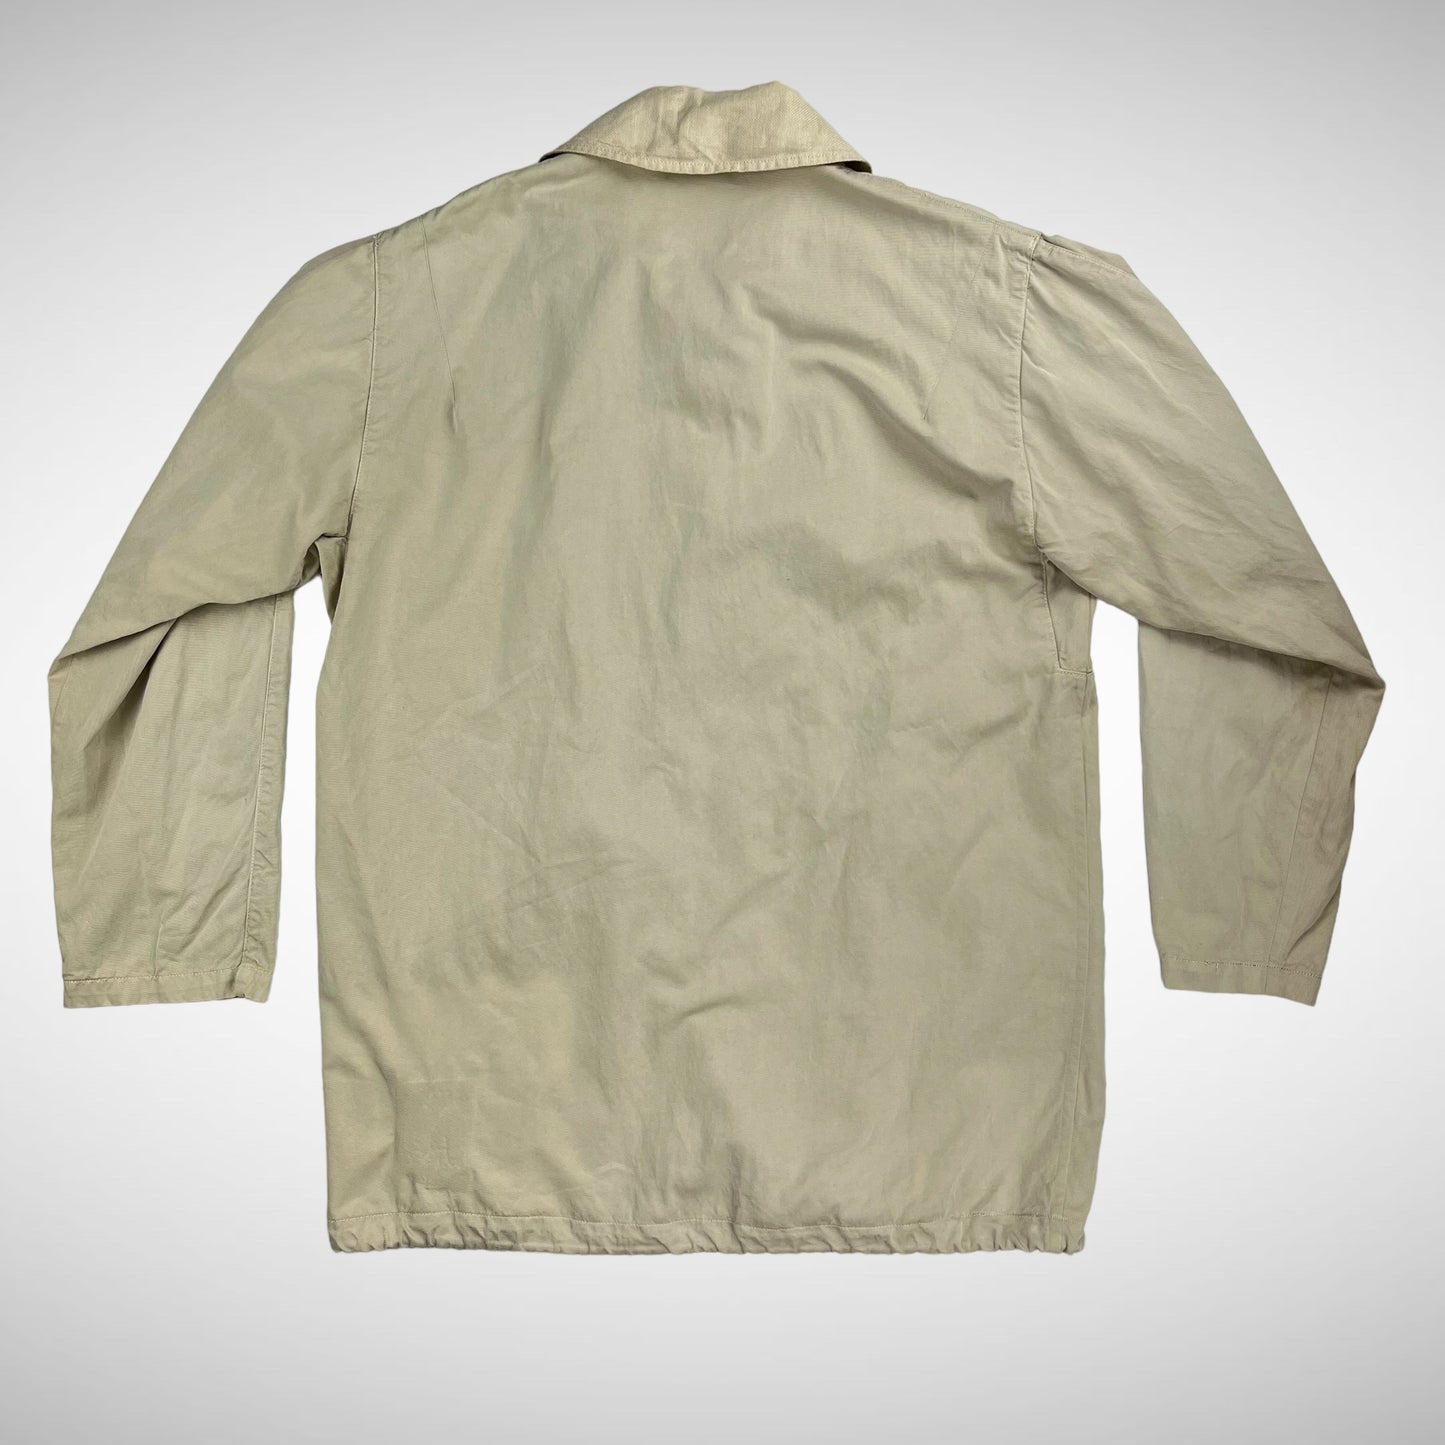 CP Company Garment Dyed Light Jacket (1990)